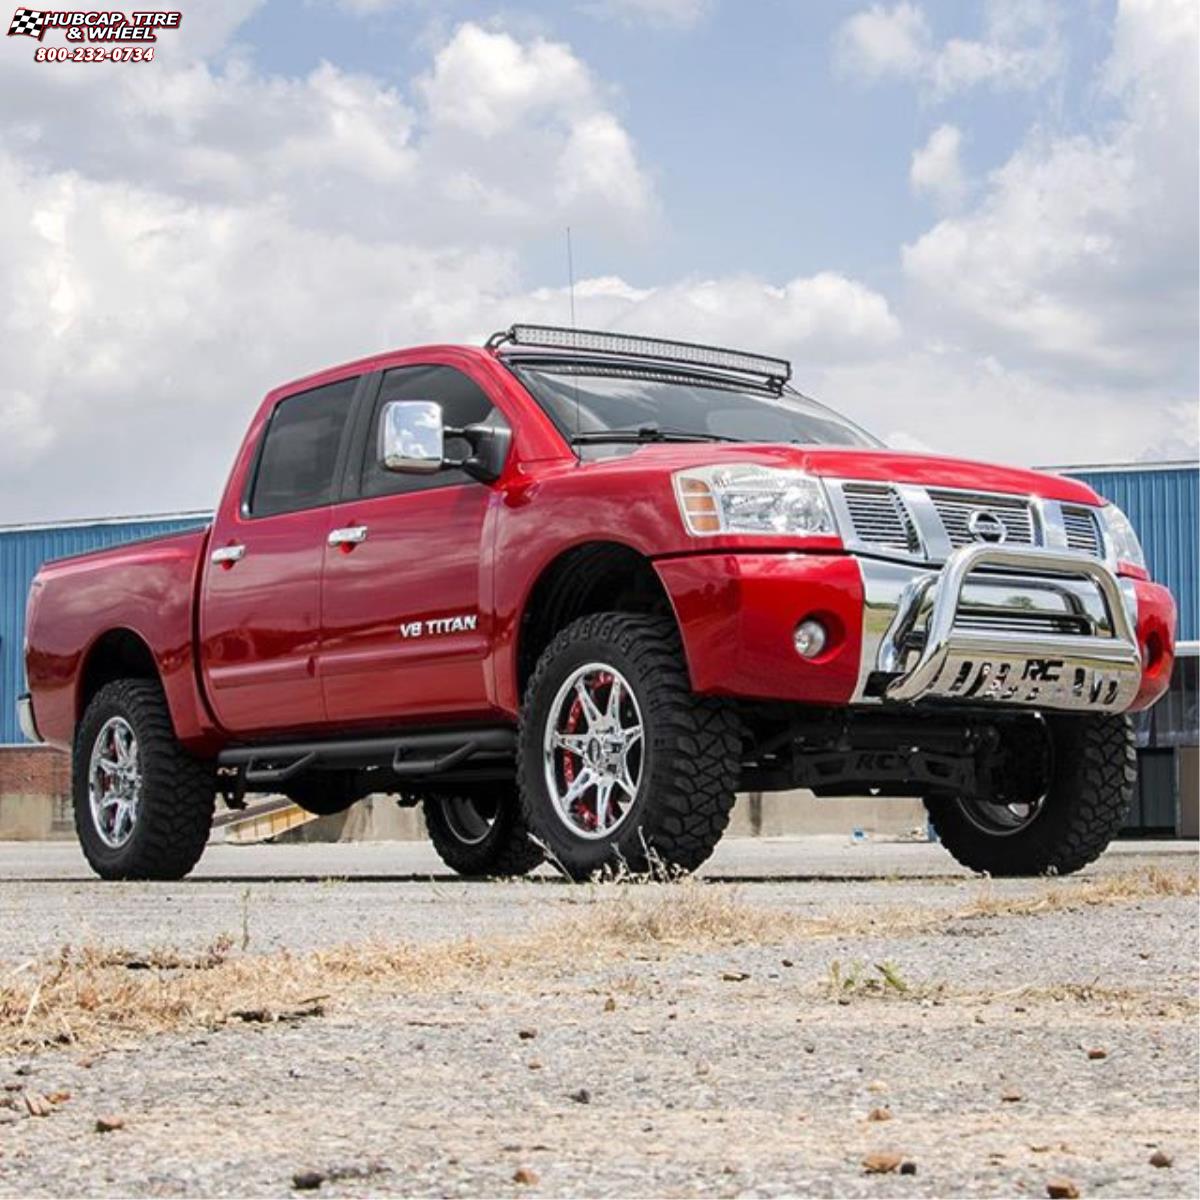 vehicle gallery/nissan titan moto metal mo961  Chrome Red Insert wheels and rims